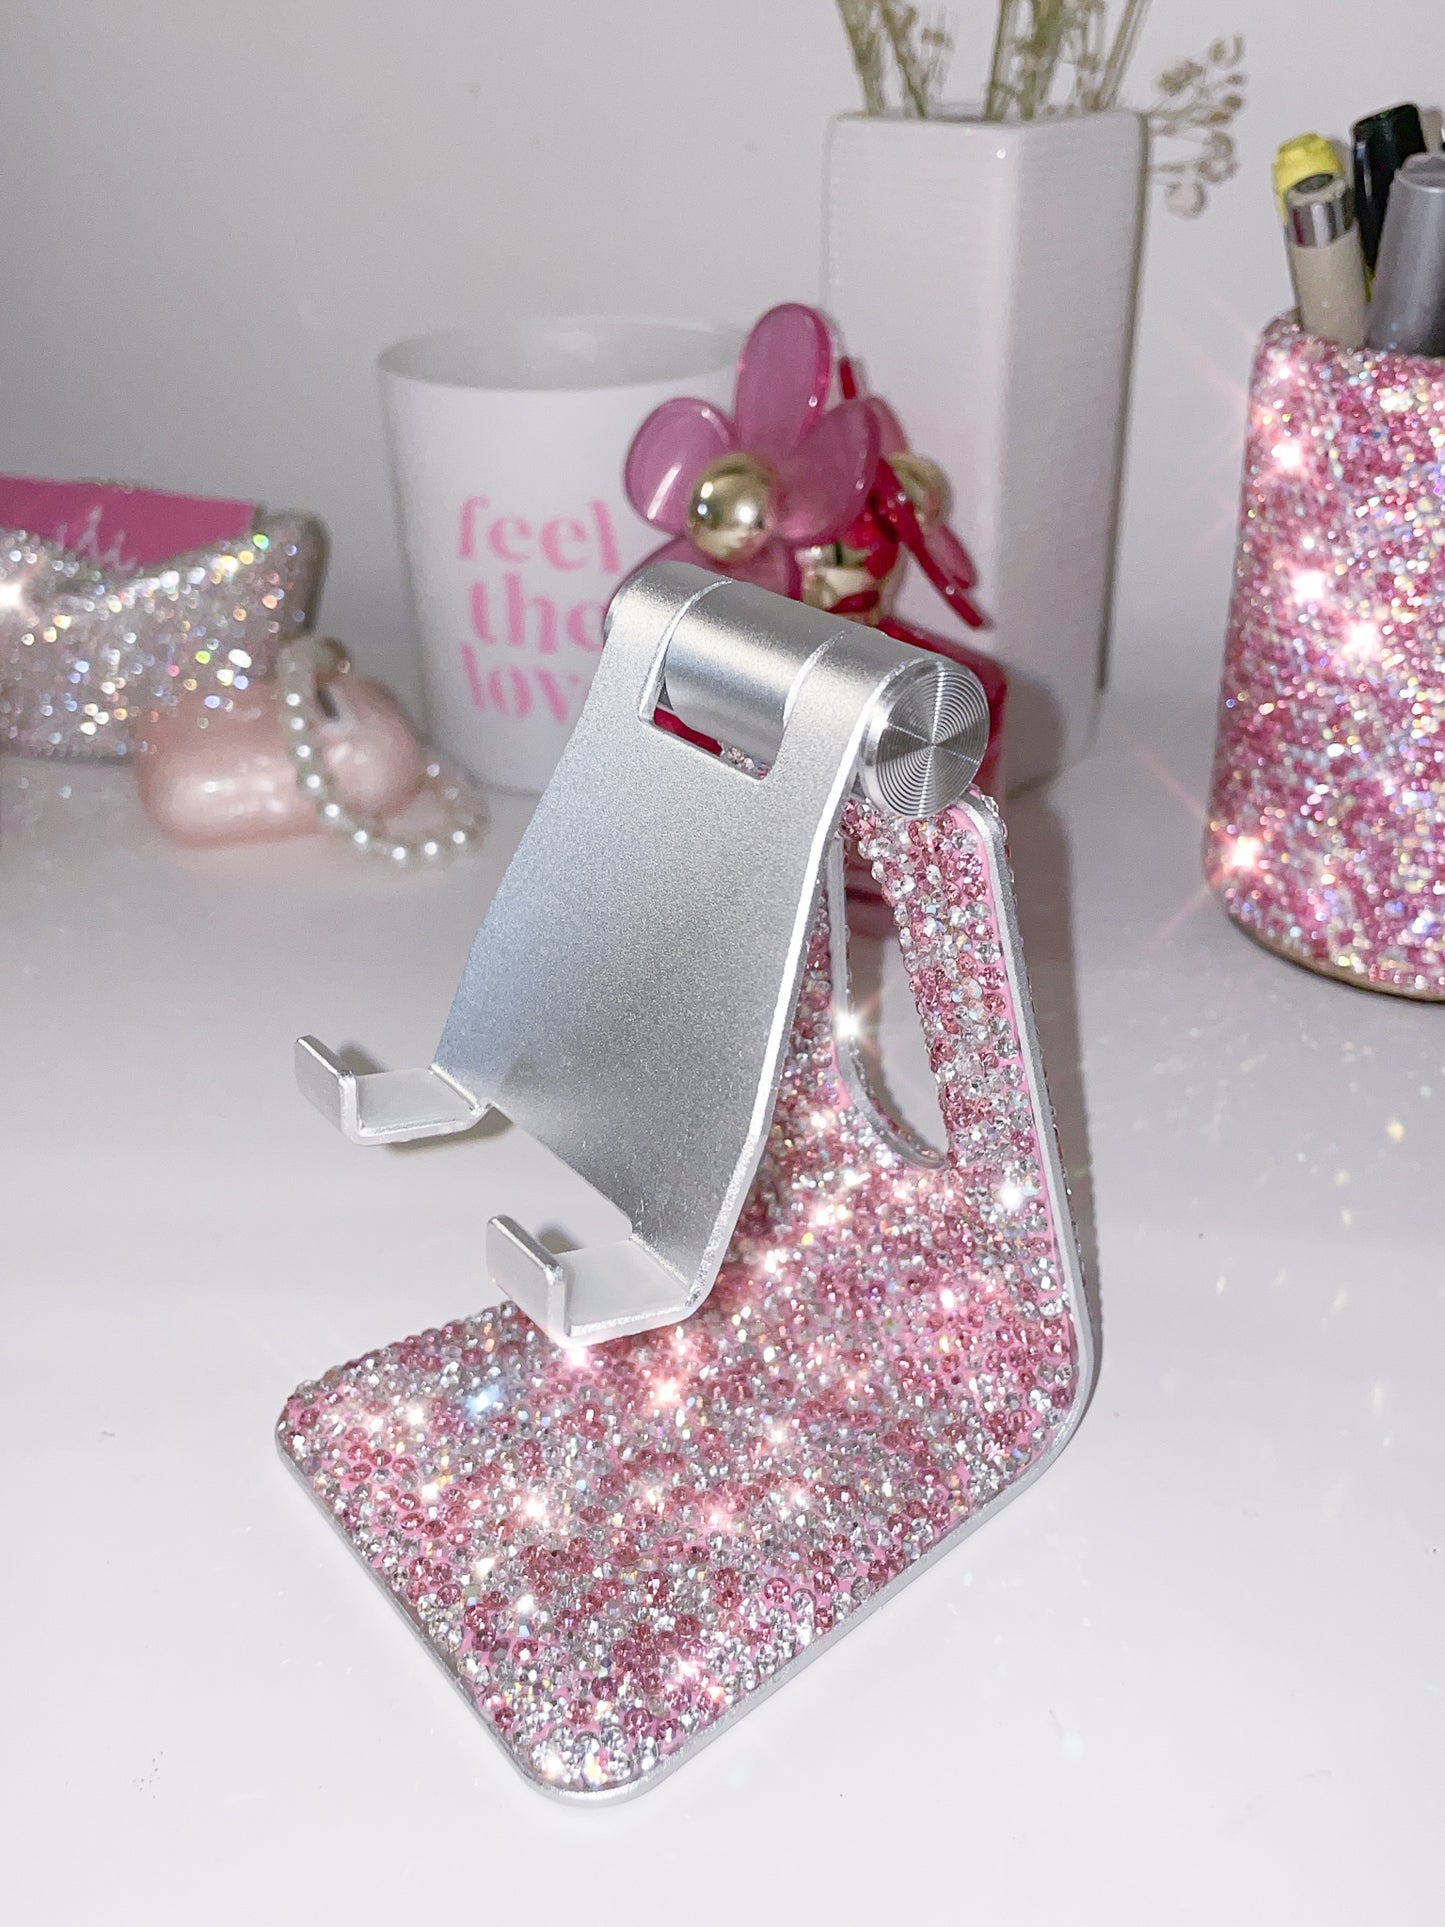 Bling Rhinestone Crystal Adjustable Cell Phone Stand, Phone Holder for Desk, Phone Desktop Holder Stand Compatible with iPhone IPAD Samsung Smart